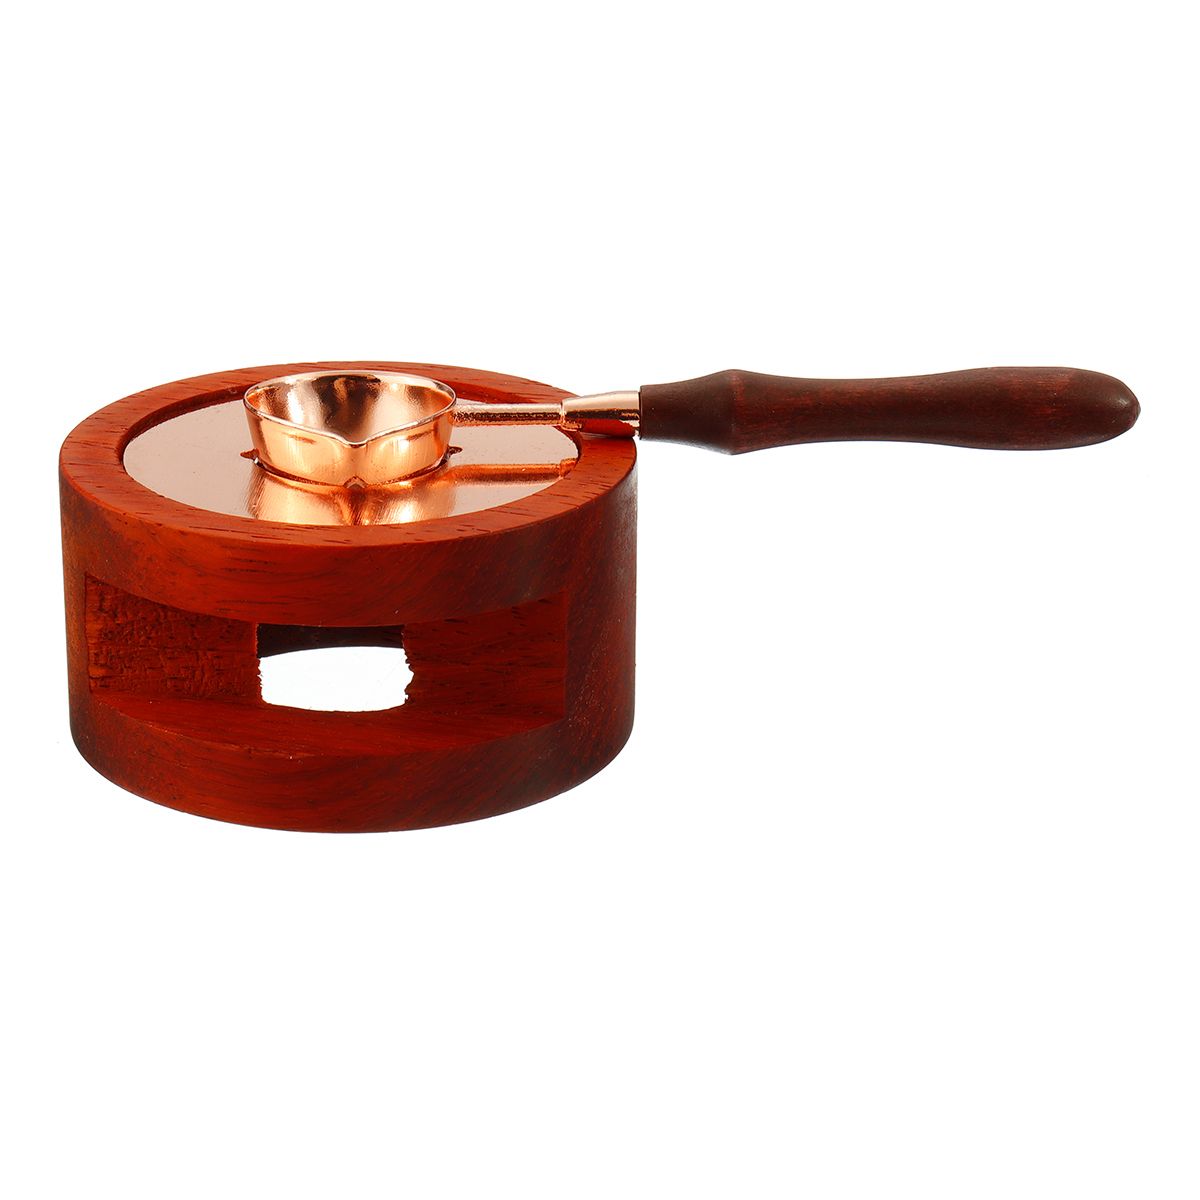 Wood-Wax-Seal-Stamp-Melting-Spoon-Stamp-Warmer-Melting-Furnace-Stove-Pot-Decorations-1592569